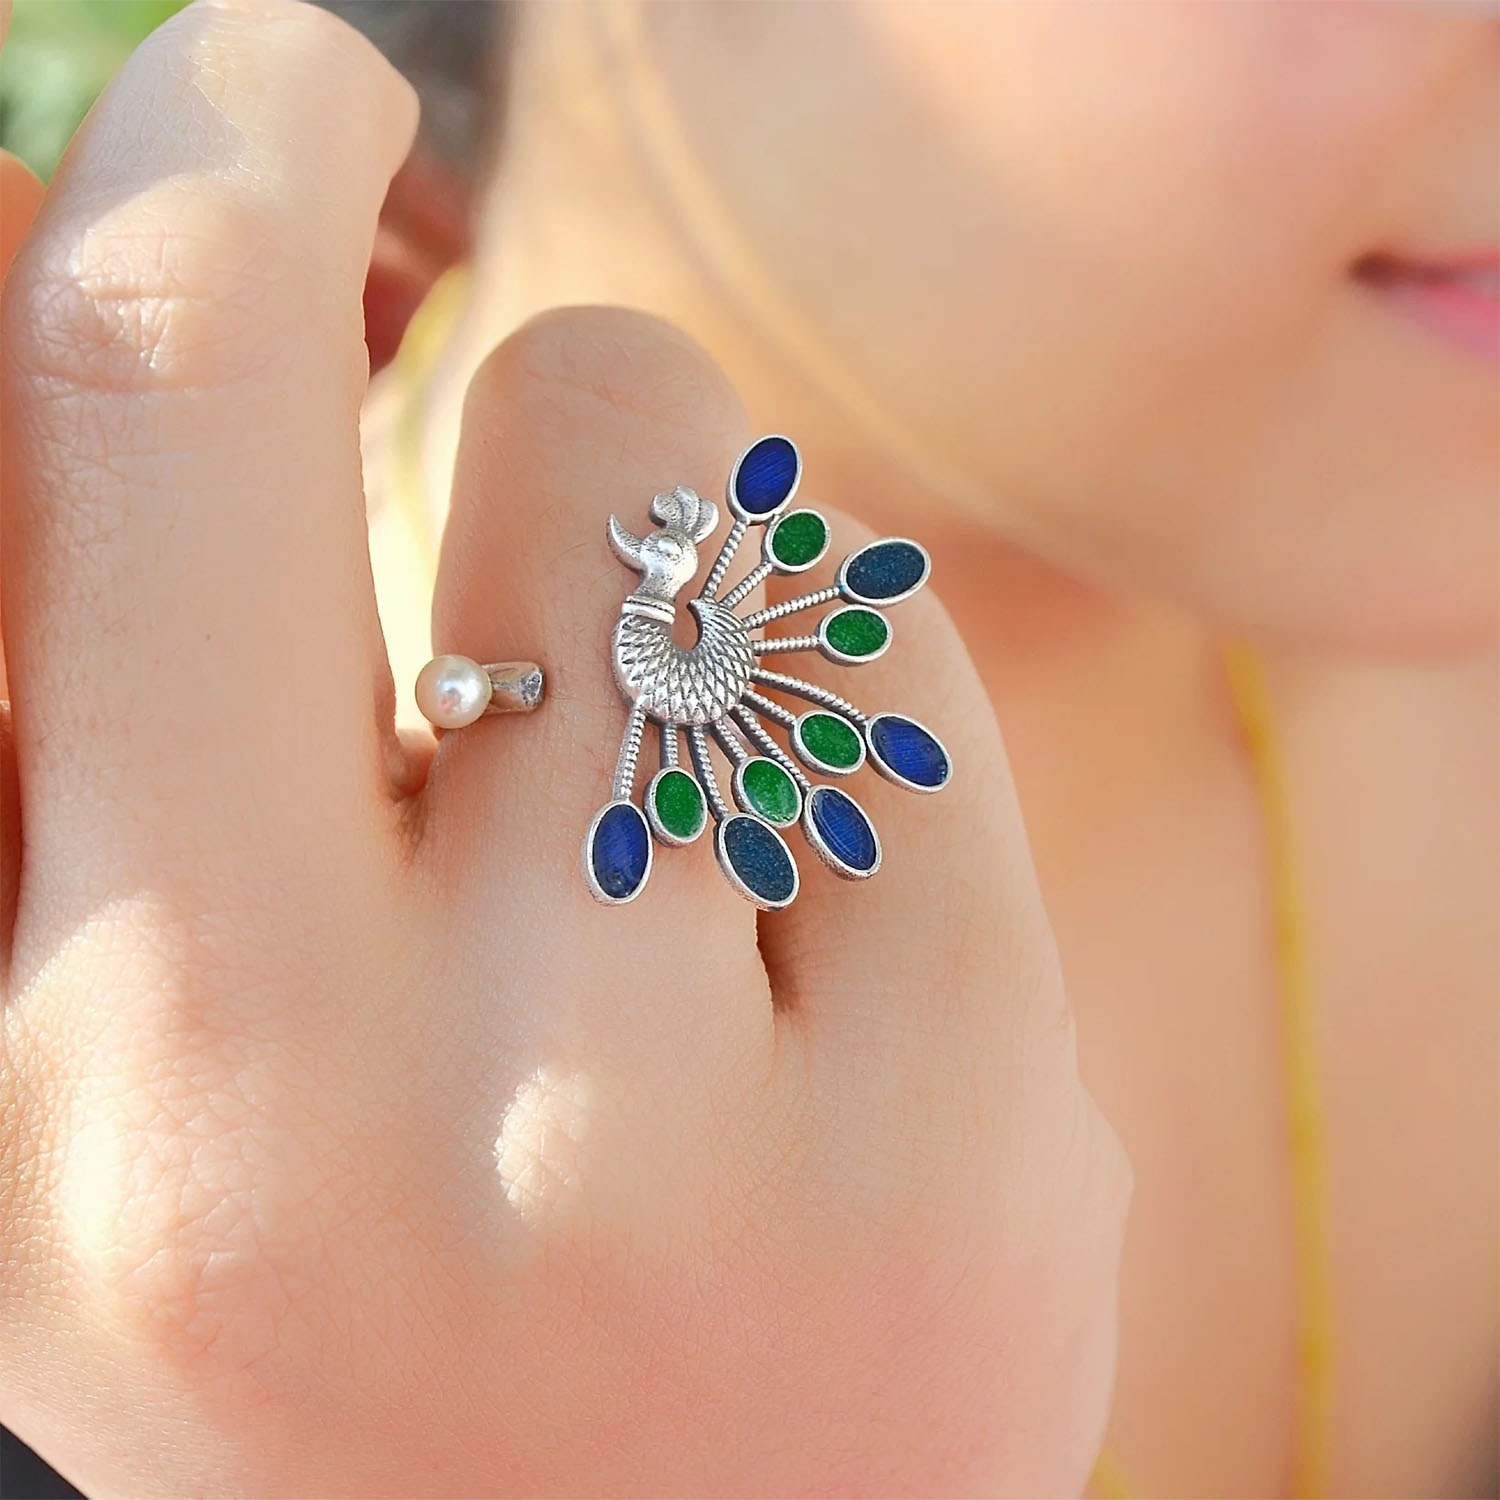 Magnificent Peacock Ring with Ornate Indian Design